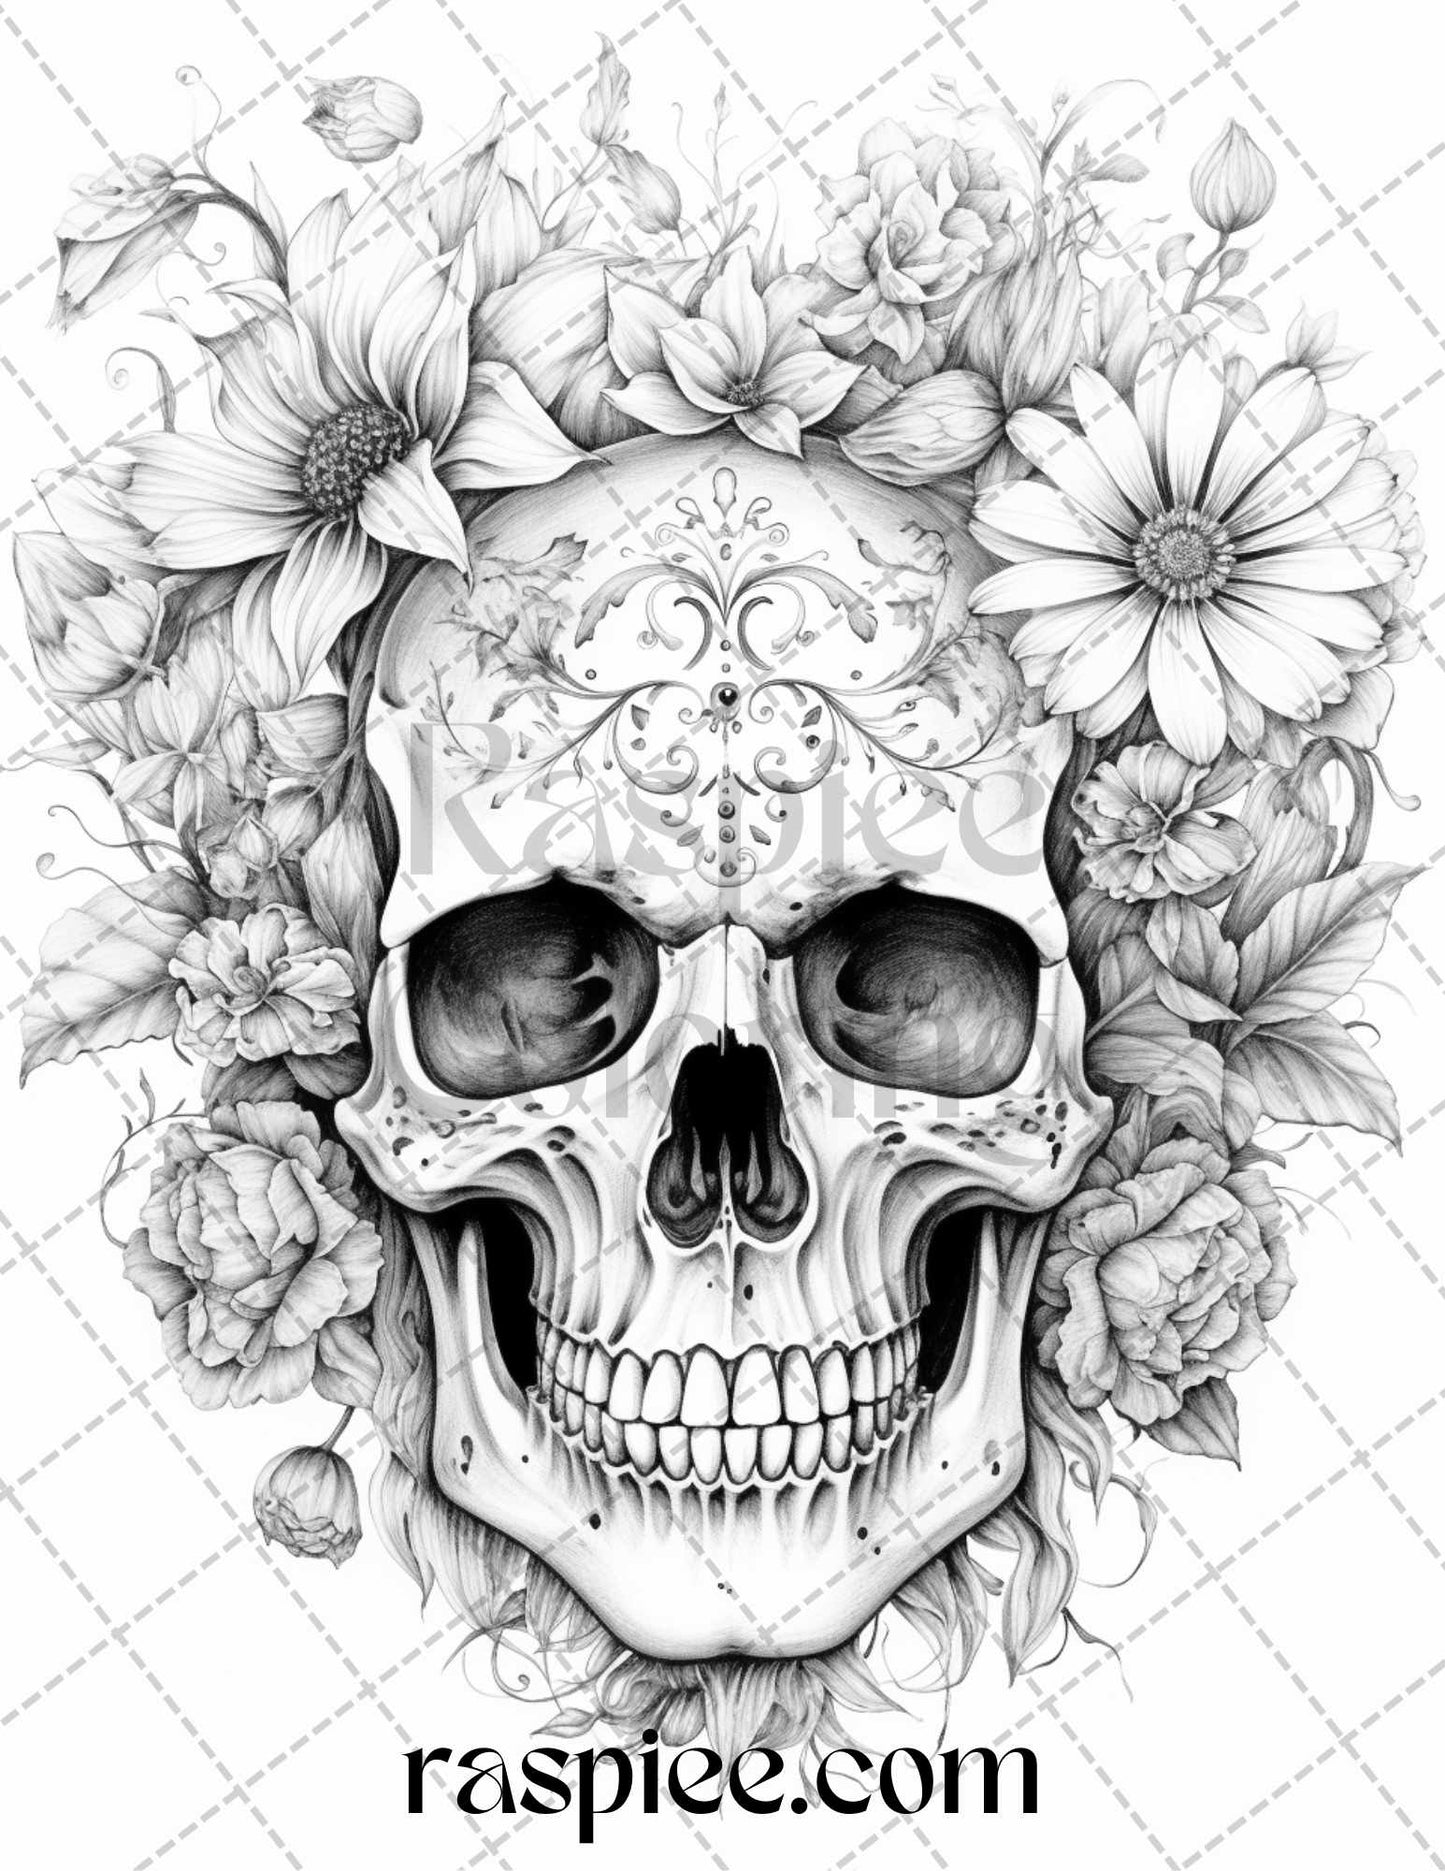 grayscale coloring pages, printable coloring sheets, adult coloring artwork, floral skull illustrations, stress relief DIY art, instant download printable, therapeutic grayscale designs, detailed floral patterns, intricate skull drawings